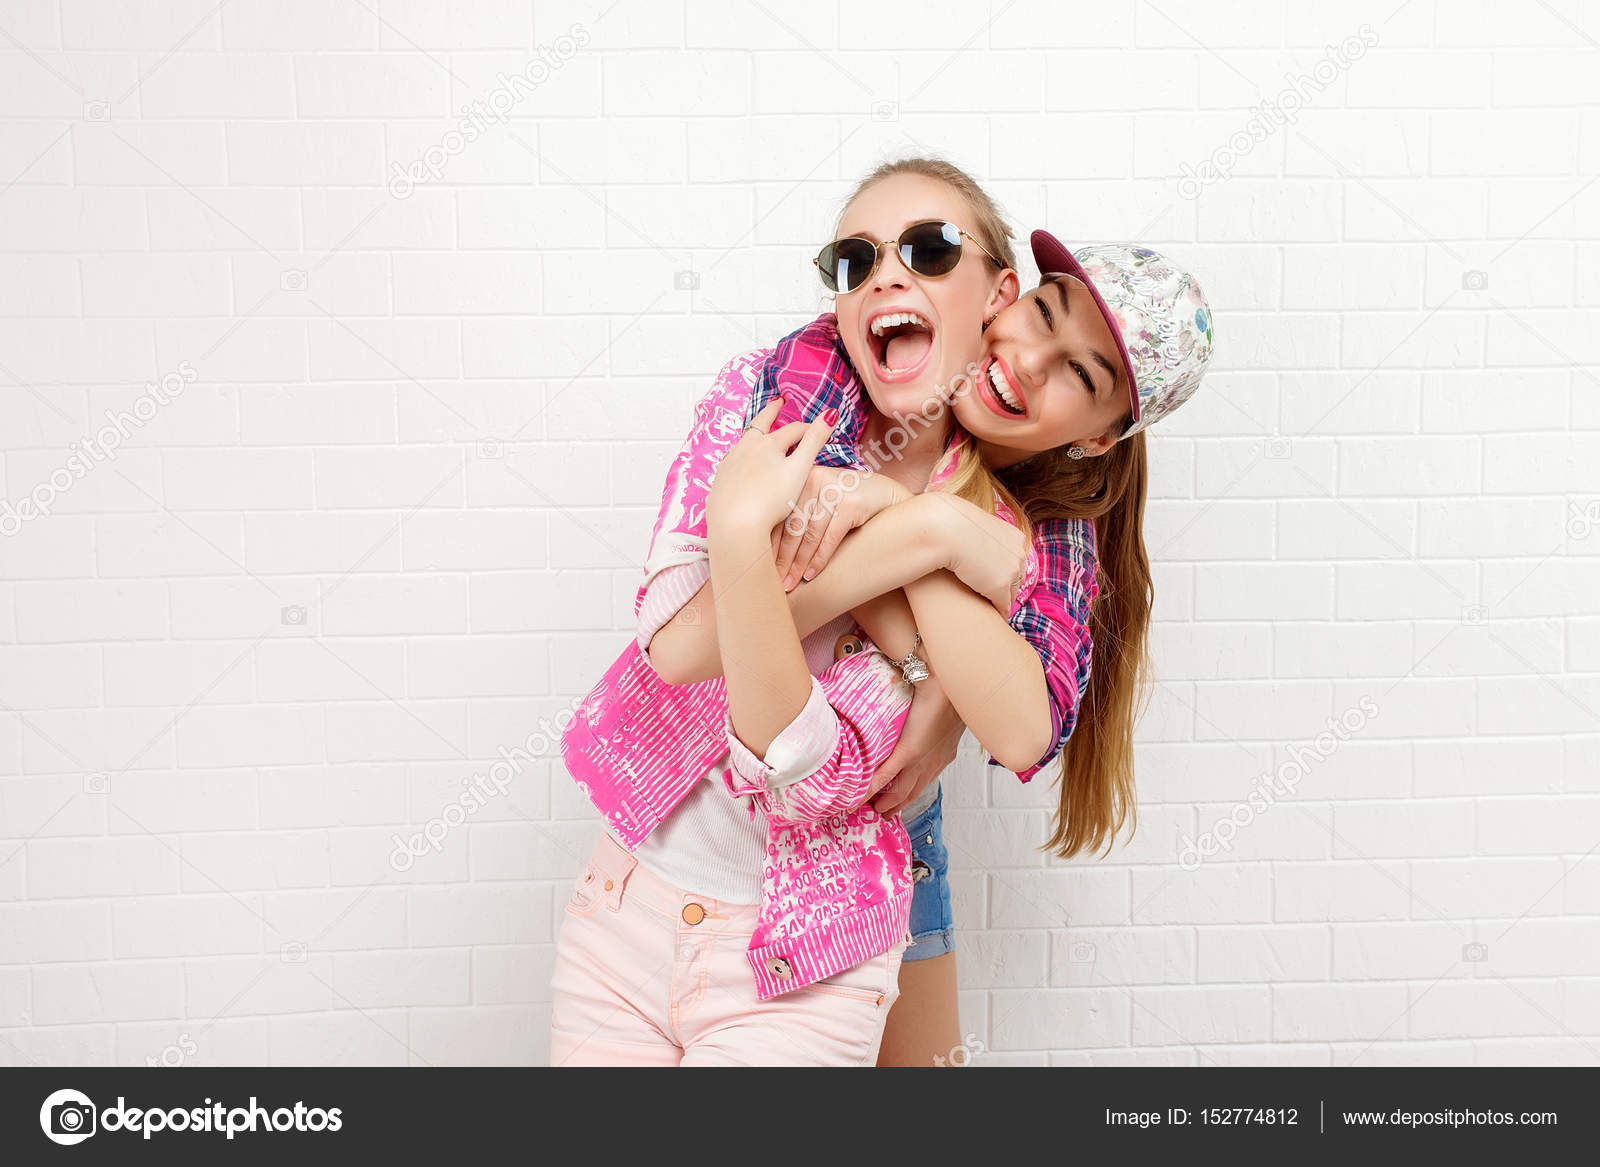 35 Fun and Creative Poses for Your Best Friend Photoshoots-gemektower.com.vn